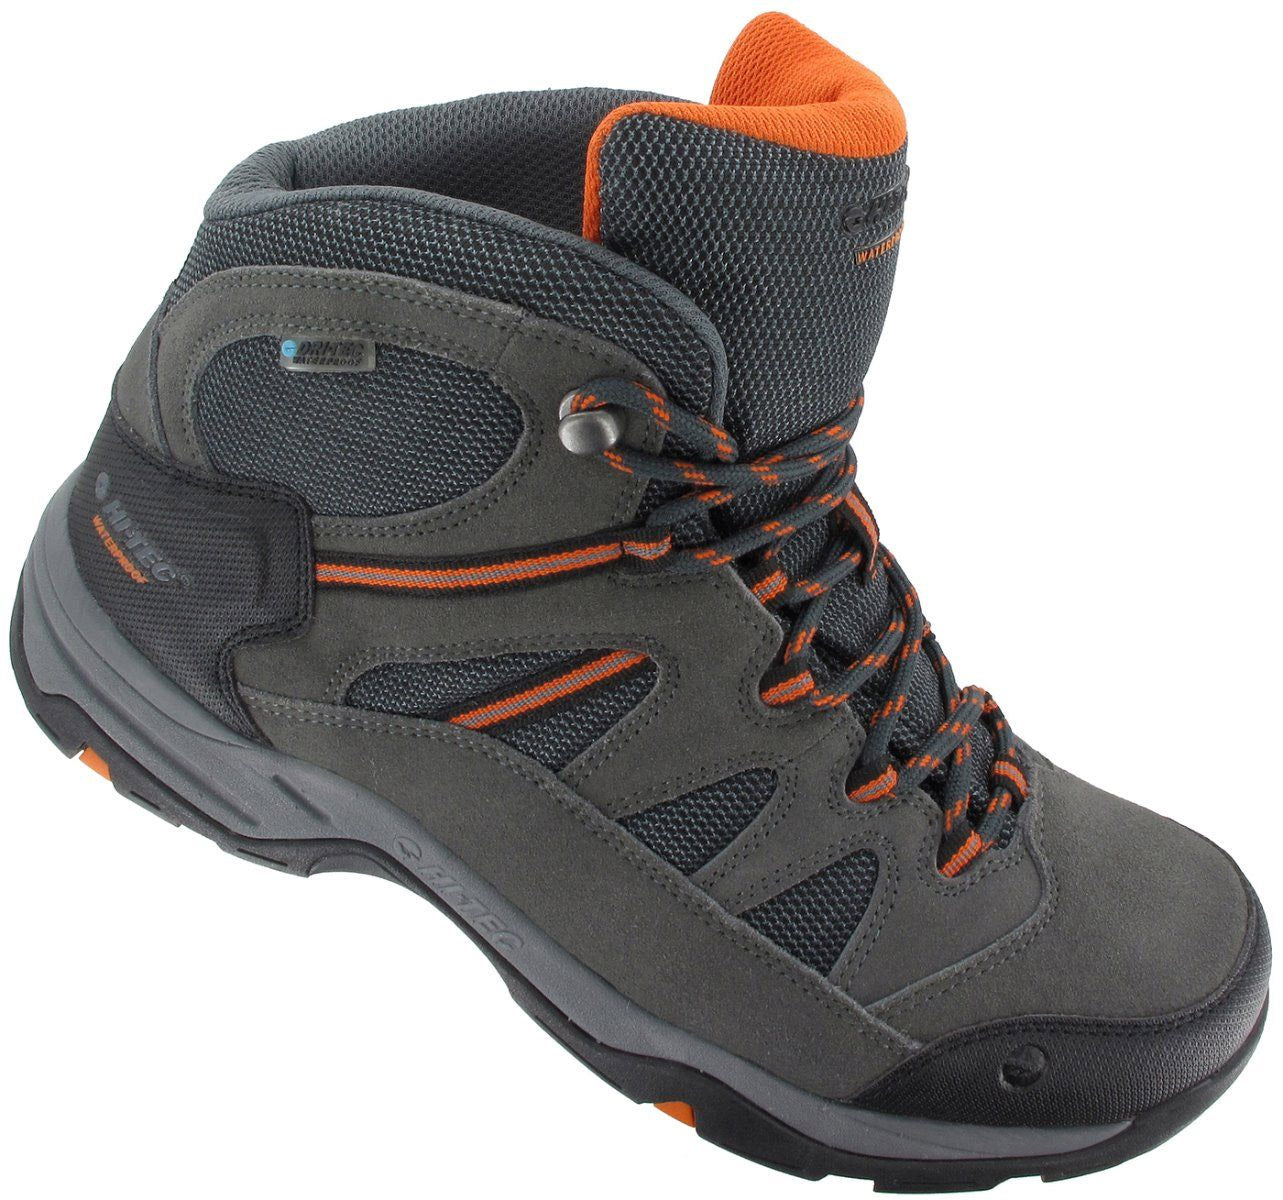 Lightweight summer nylon and suede hiking boot 